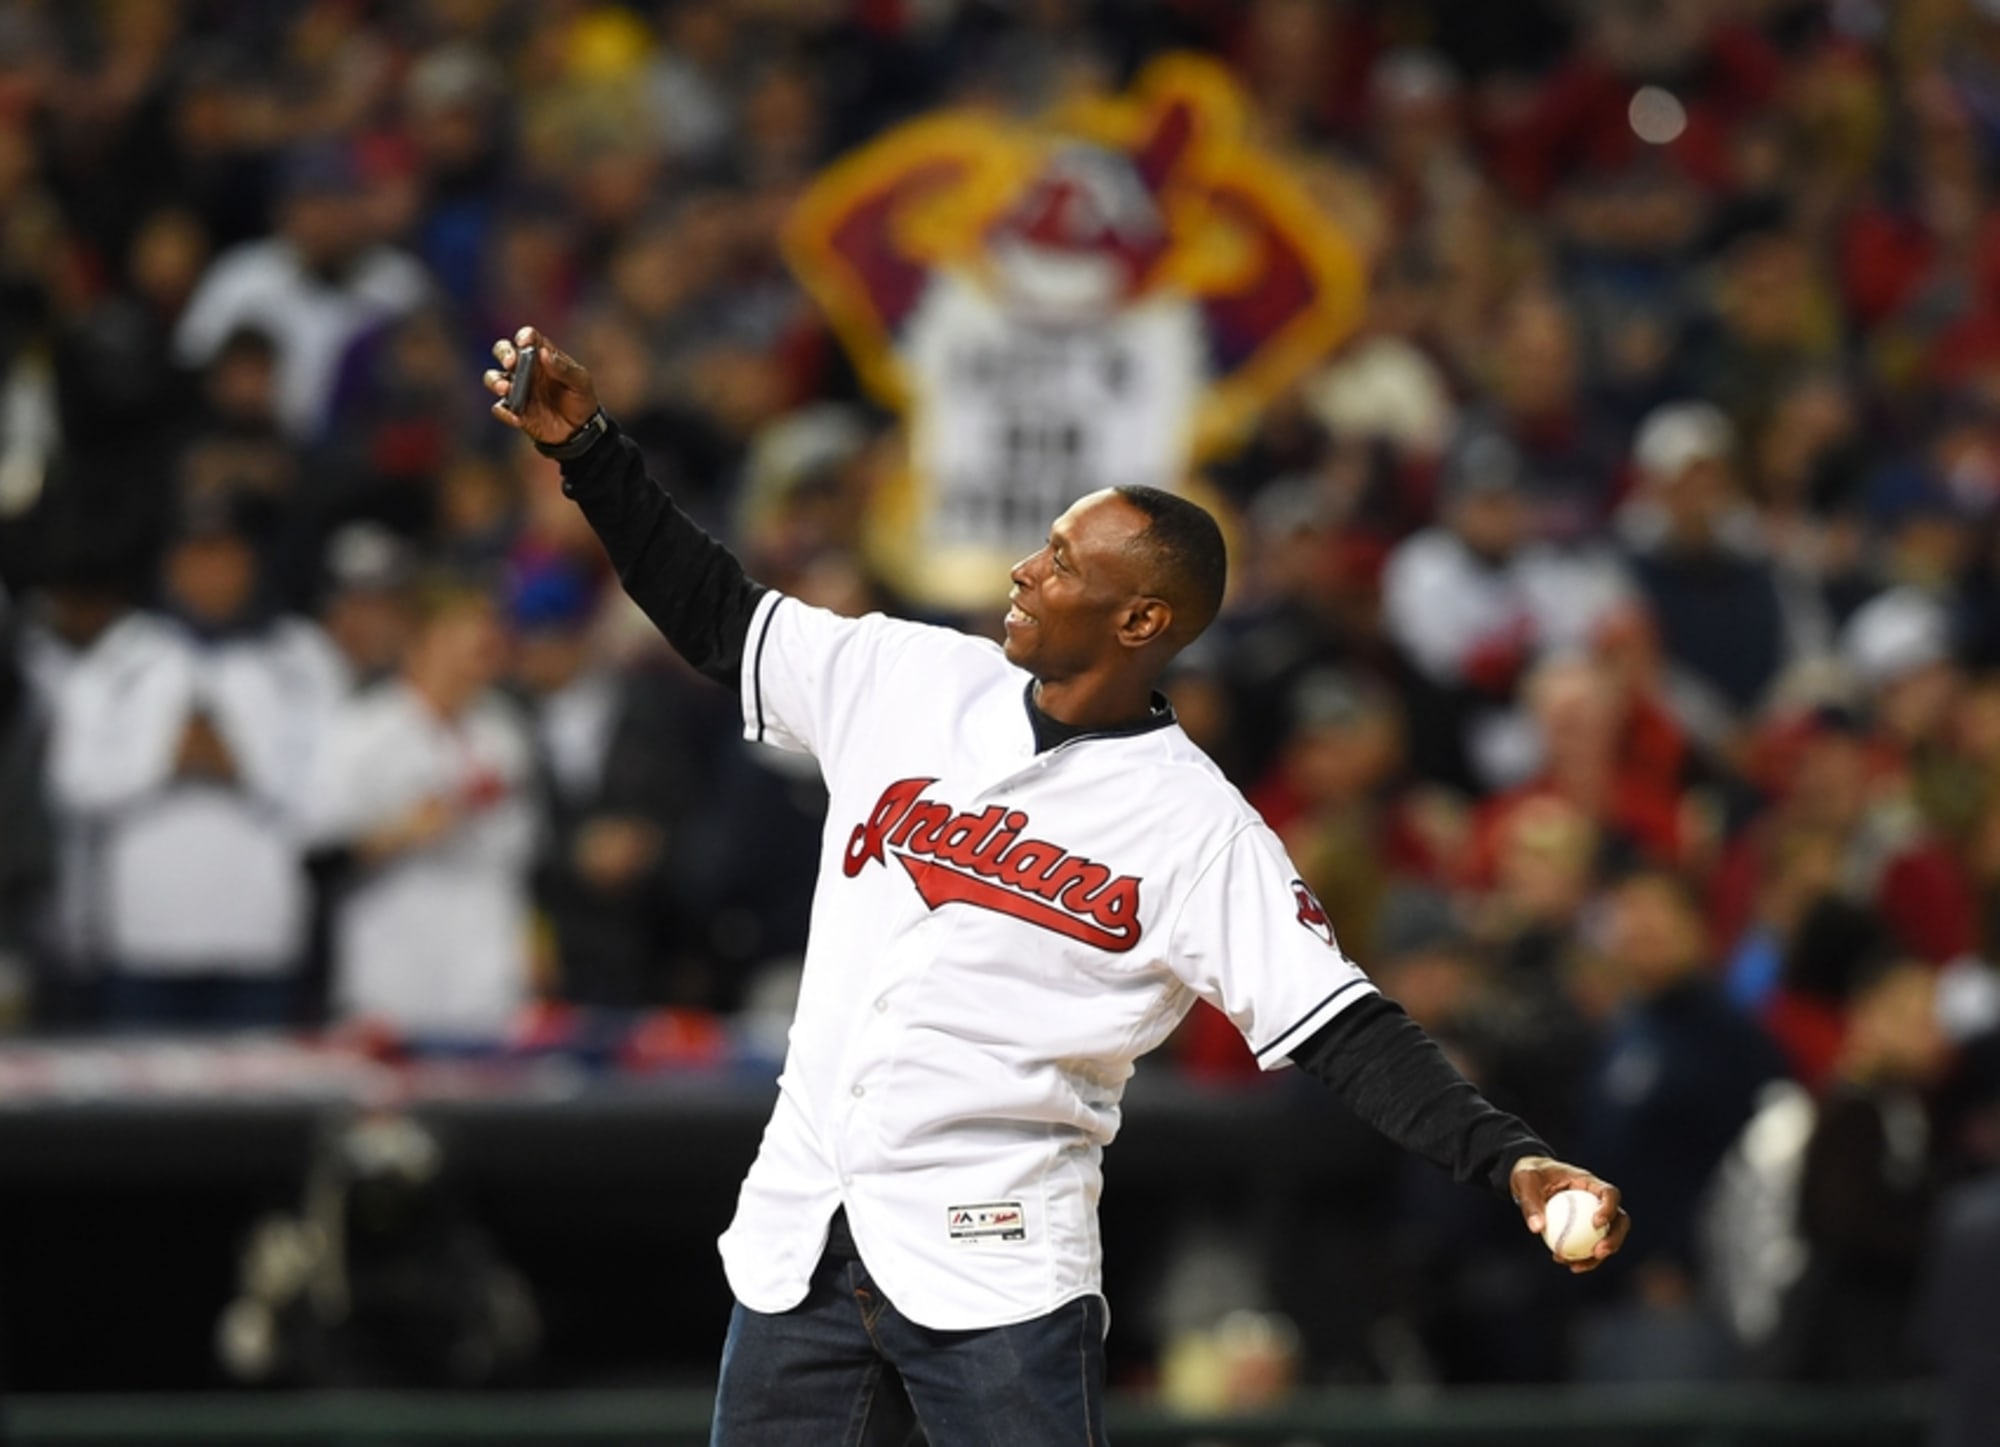 Former Wildcat Kenny Lofton Throws World Series First Pitch